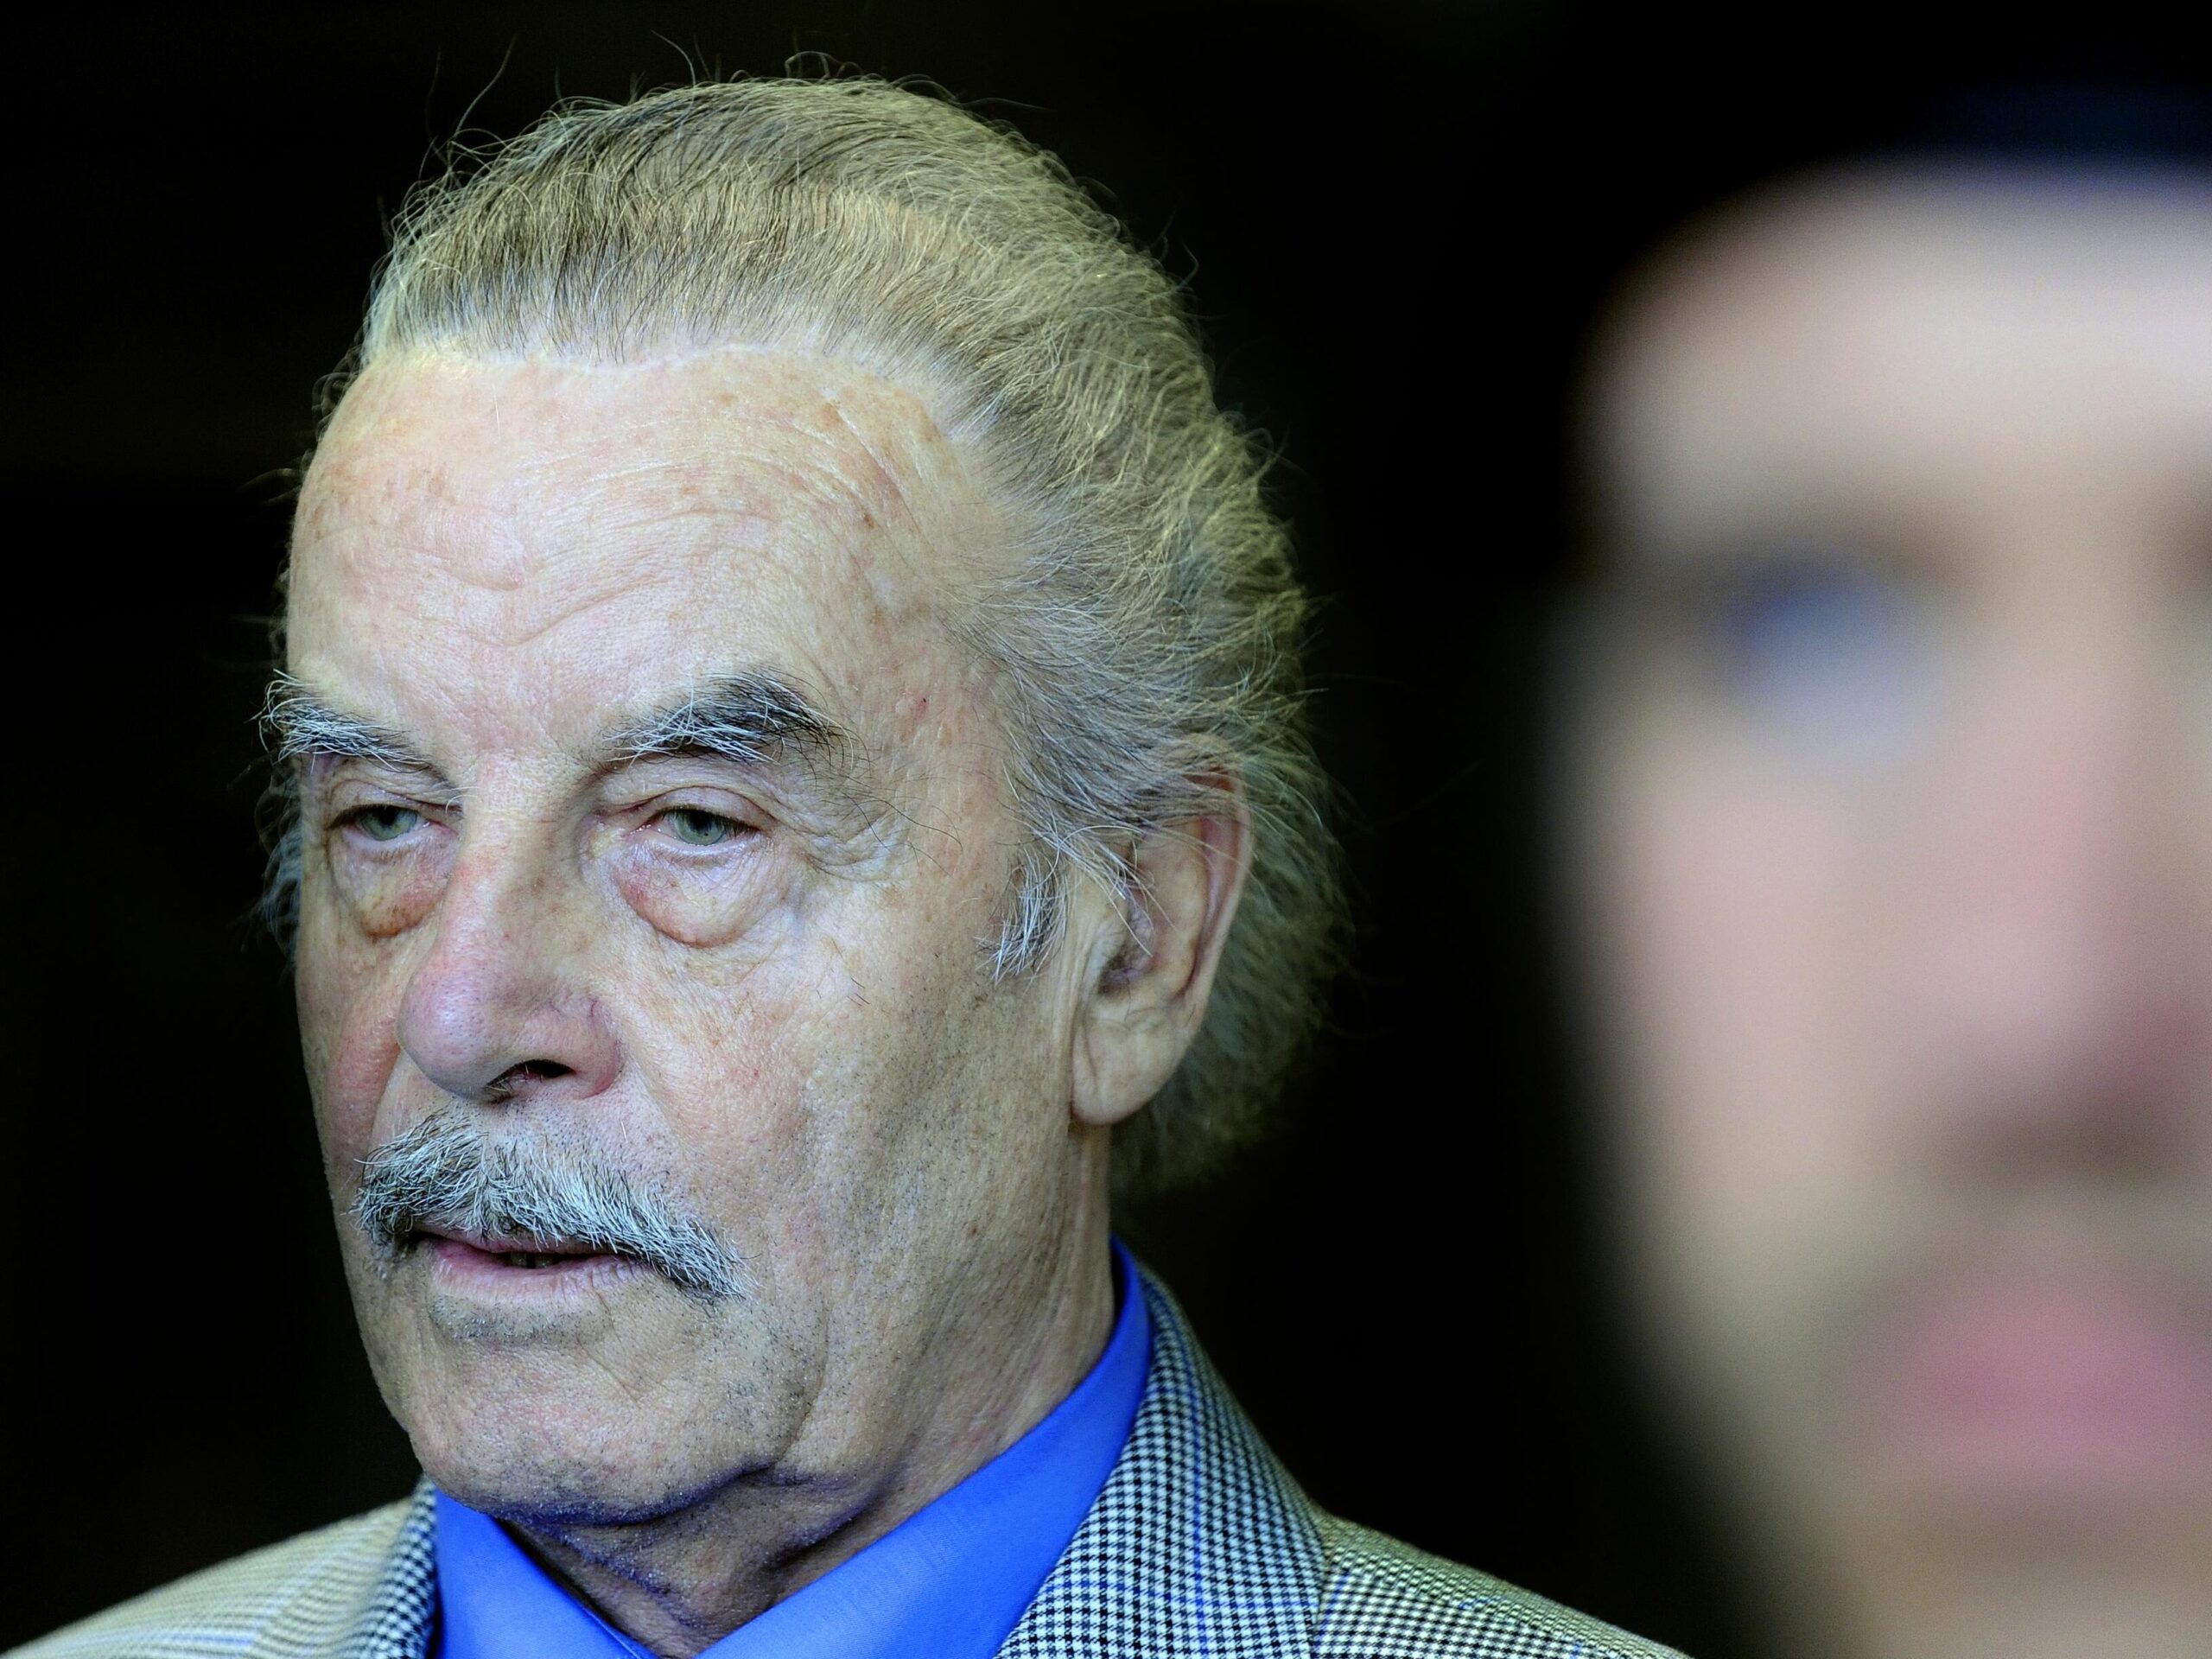 Josef Fritzl is seen during day four of his trial at the country court of St. Poelten on March 19, 2009 in St. Poelten, Austria.